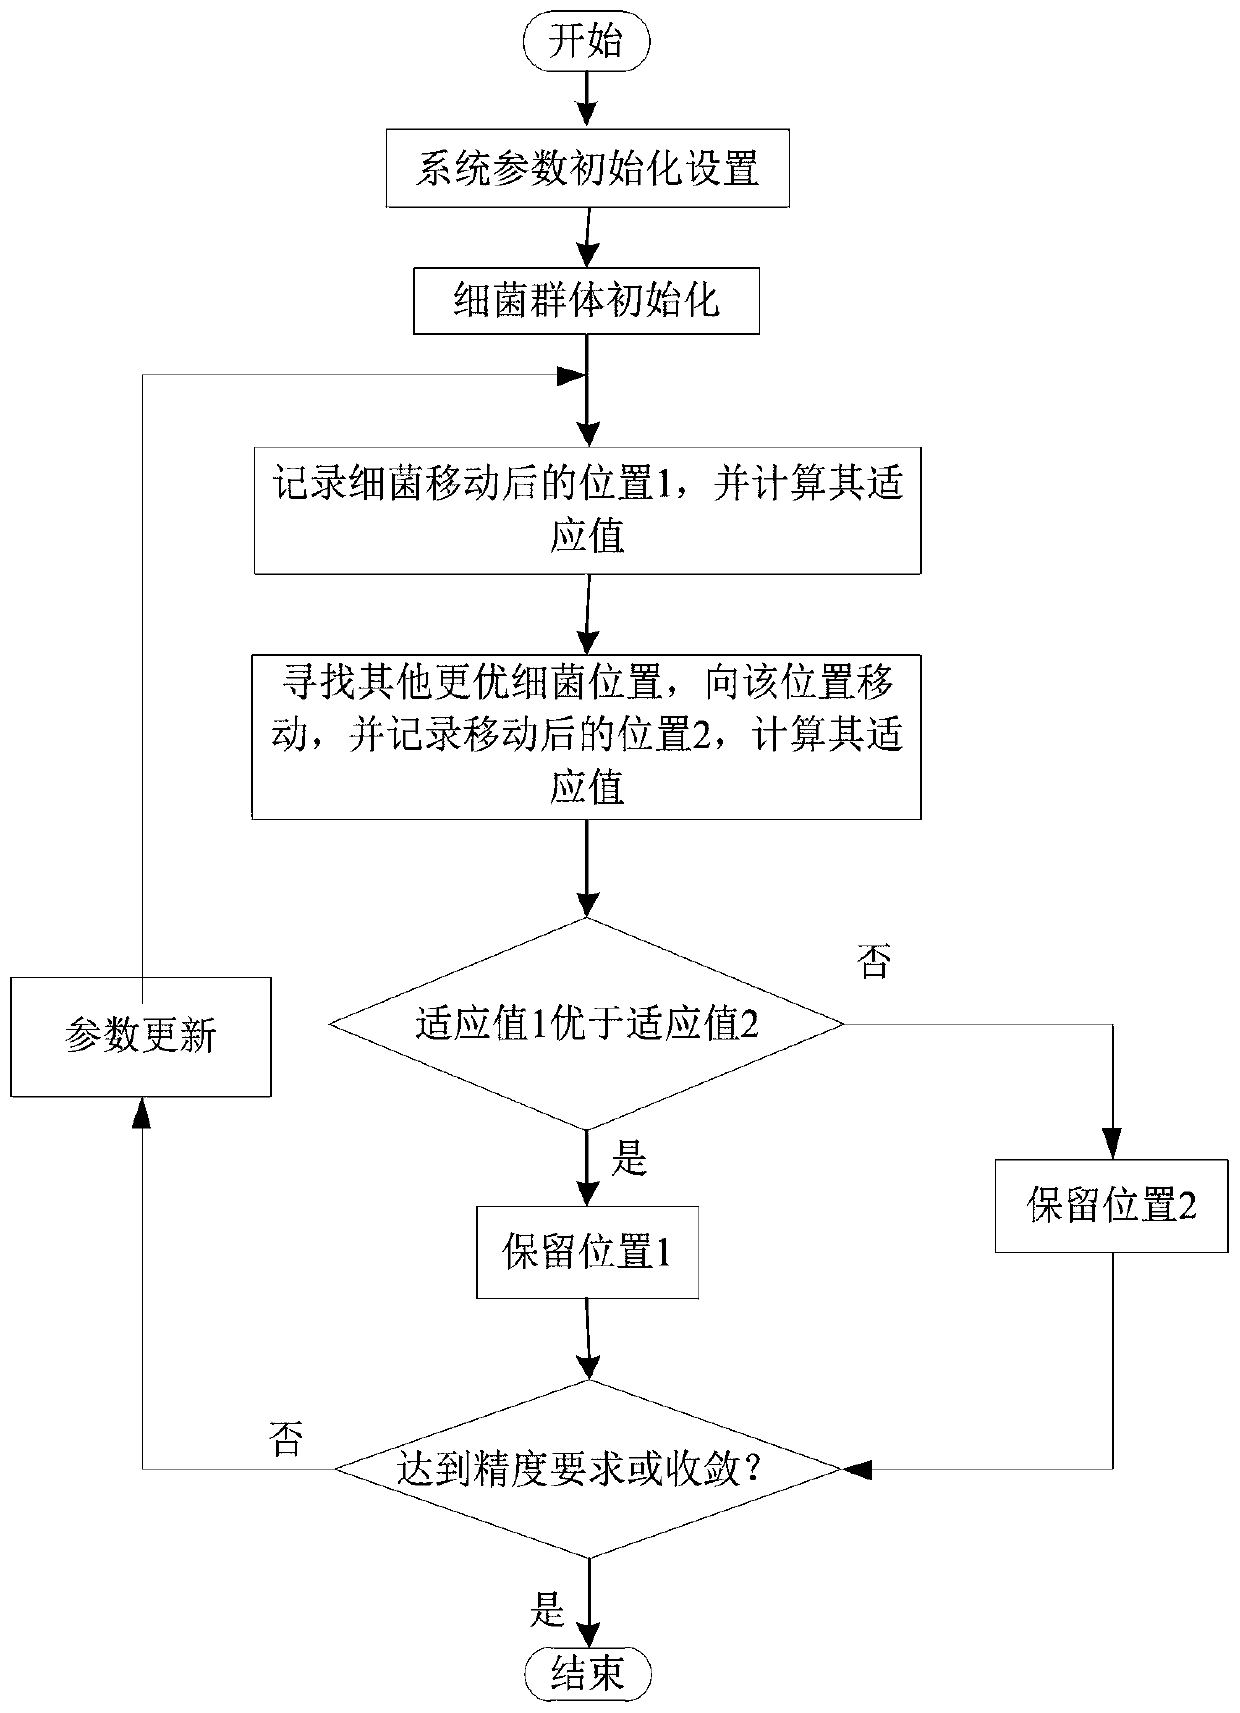 Power transmission network planning method and system based on line power flow distribution